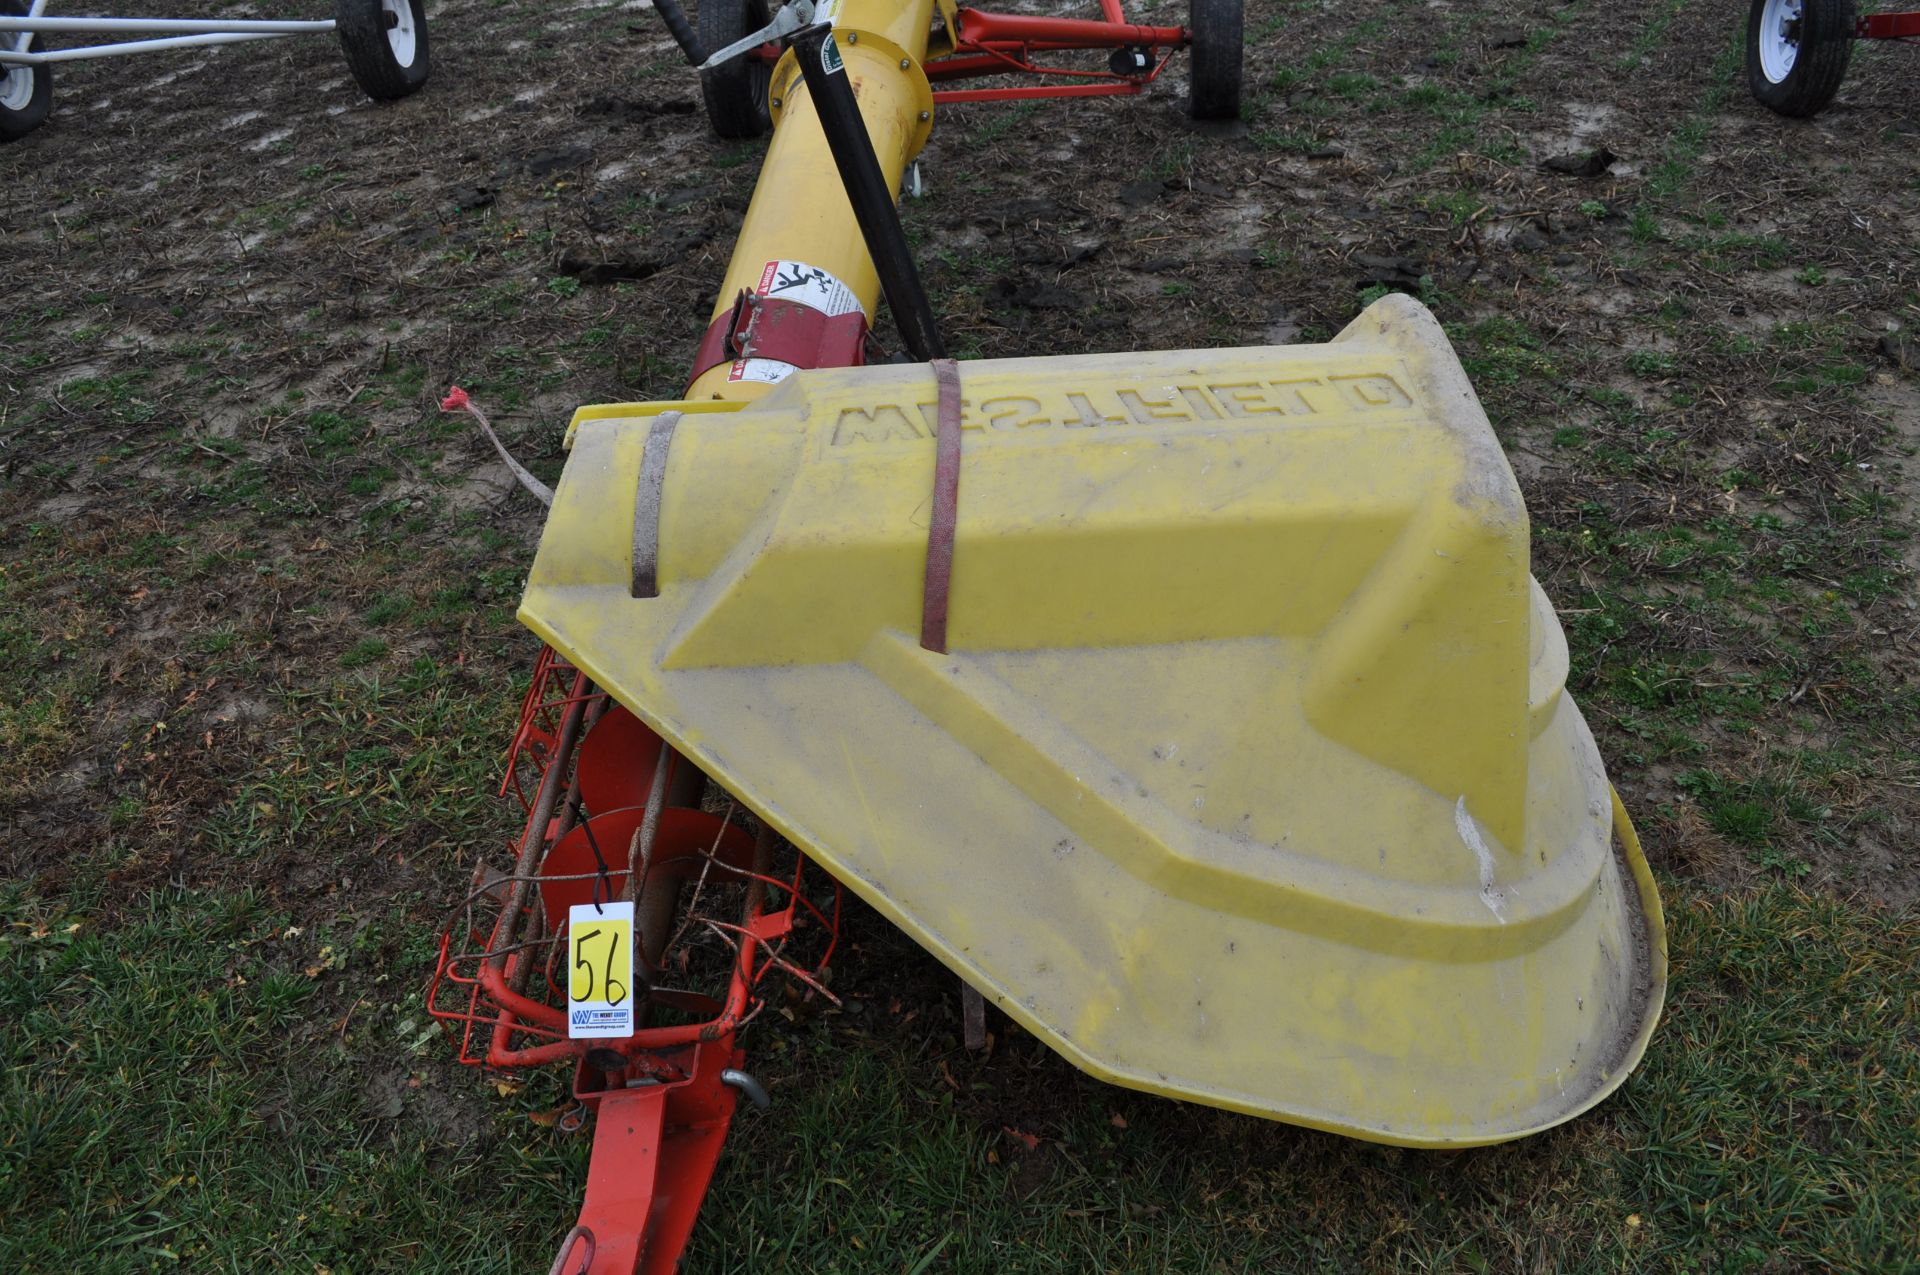 10” x 31’ Westfield 100-31 auger, 7.5 hp motor, load out manual lift - Image 8 of 8